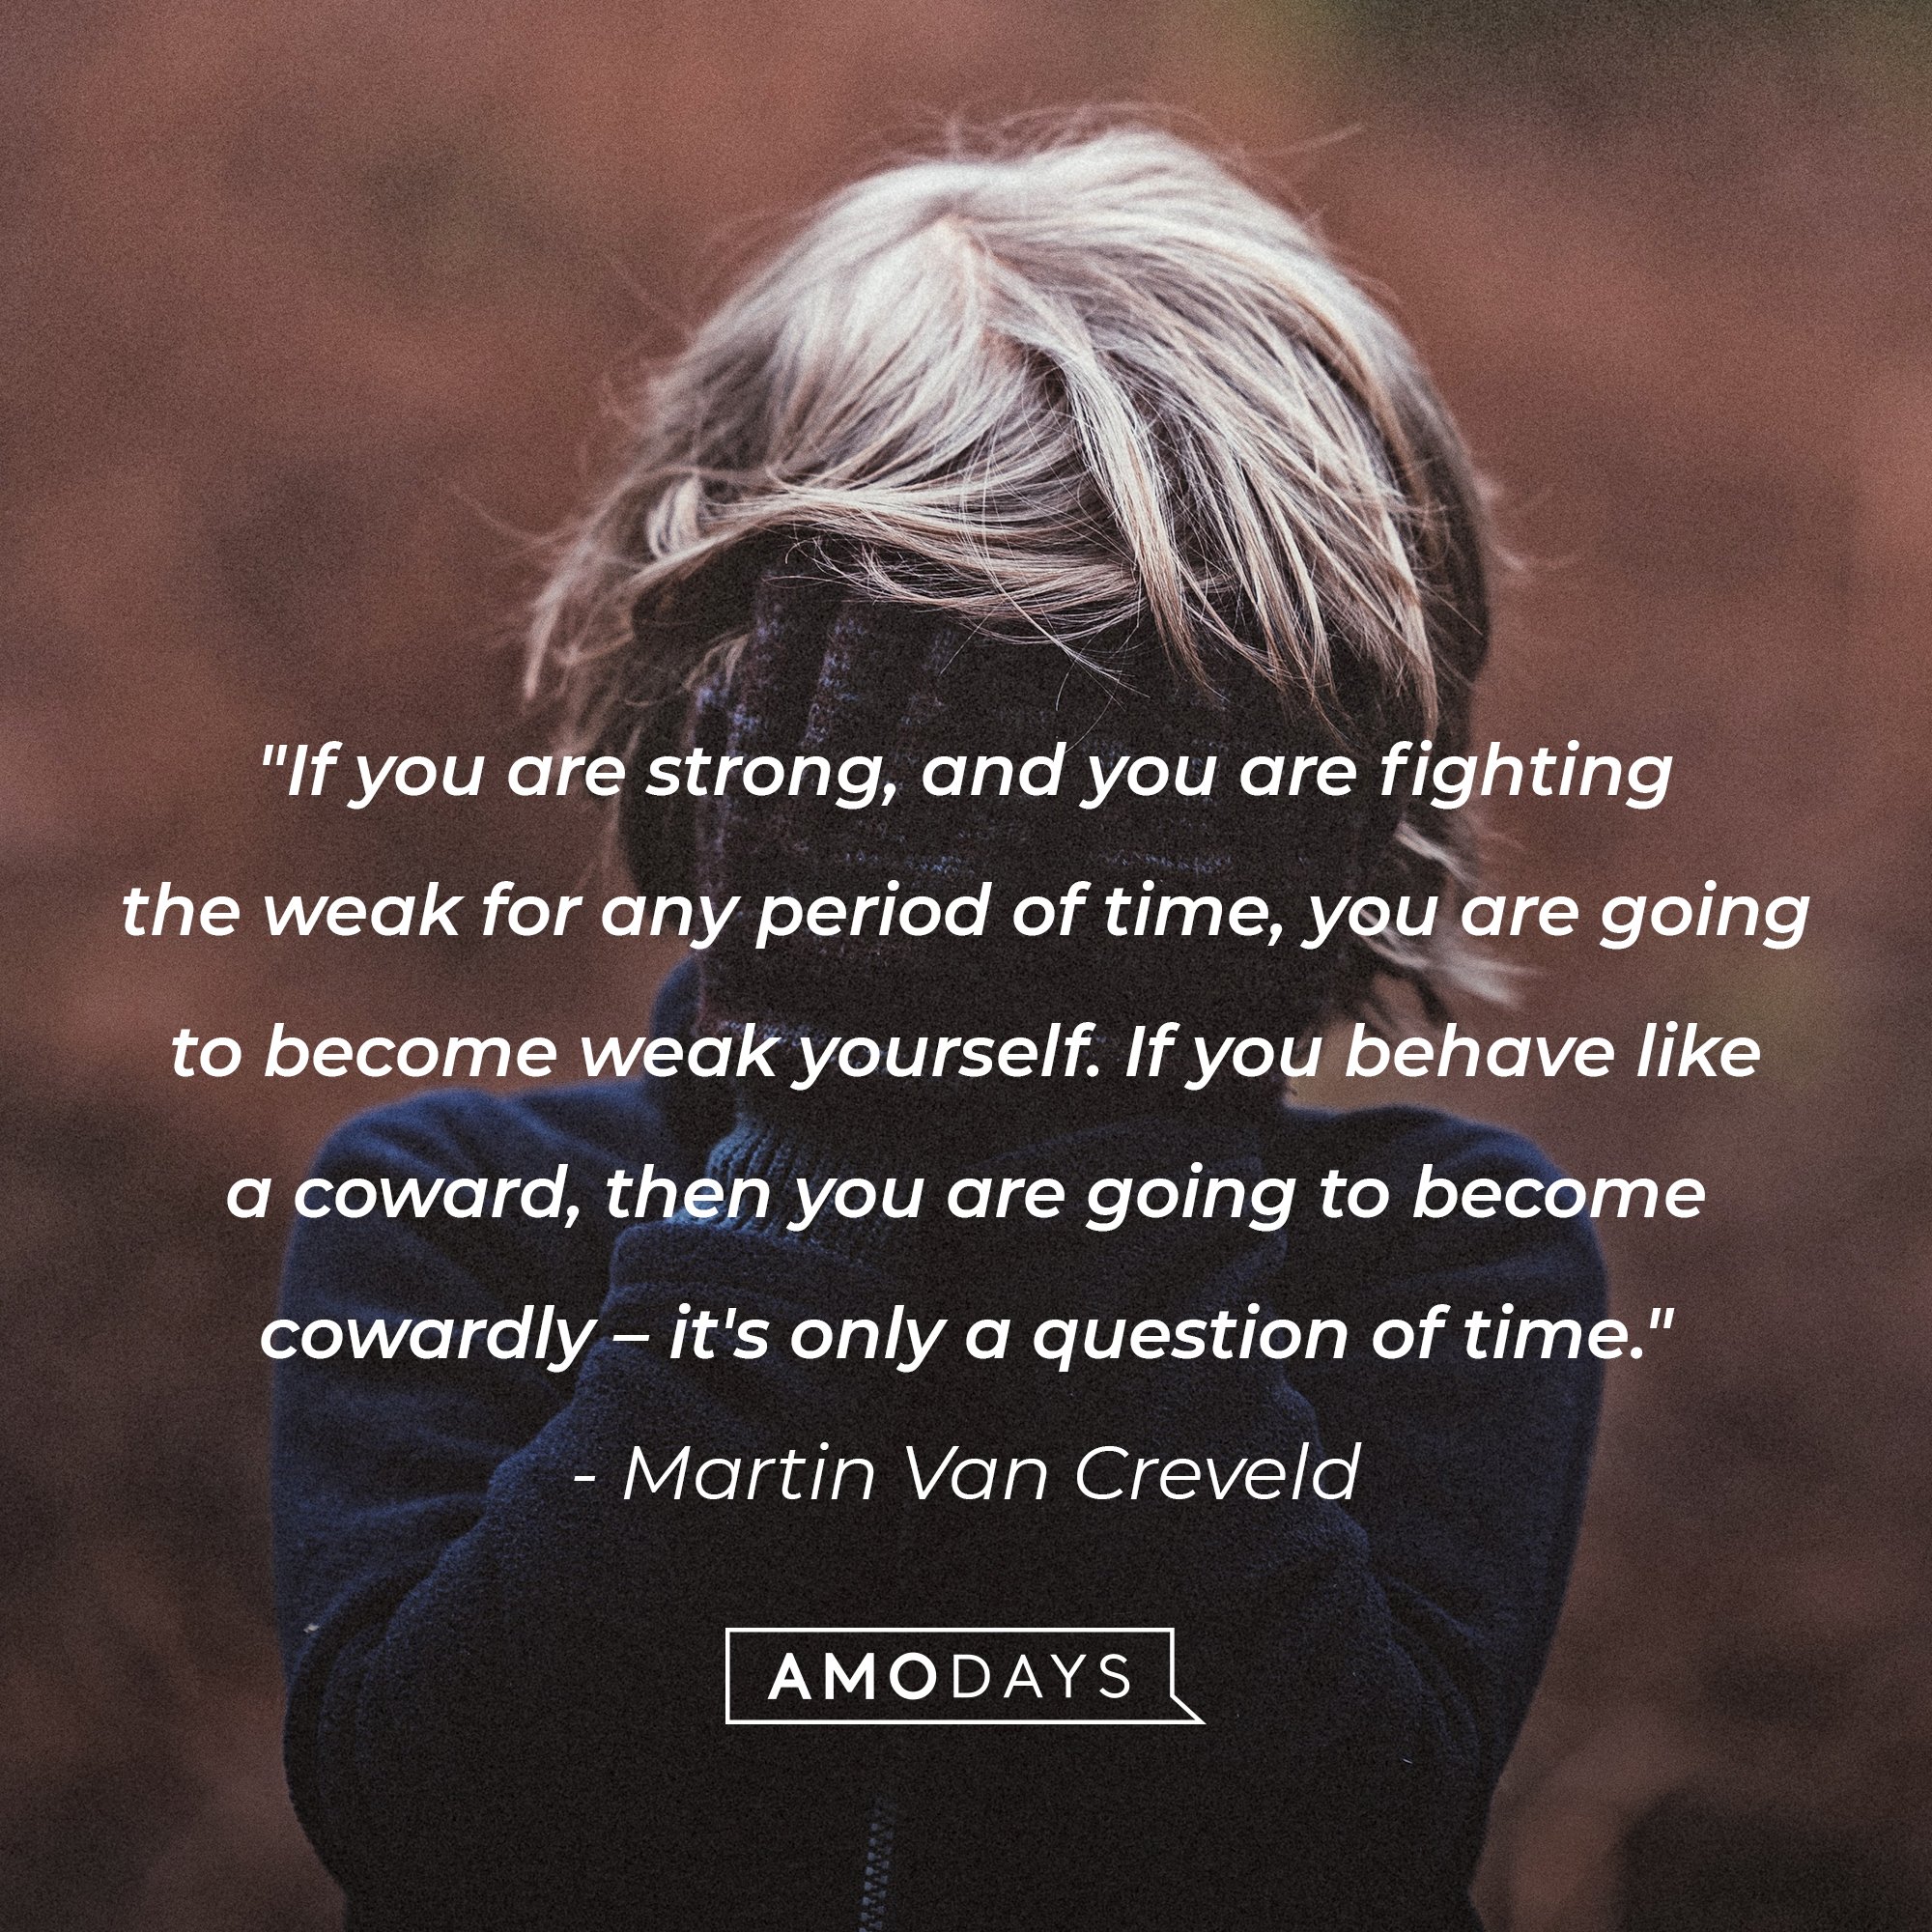 Martin Van Creveld’s quote: "If you are strong, and you are fighting the weak for any period of time, you are going to become weak yourself. If you behave like a coward, then you are going to become cowardly – it's only a question of time." | Image: AmoDays